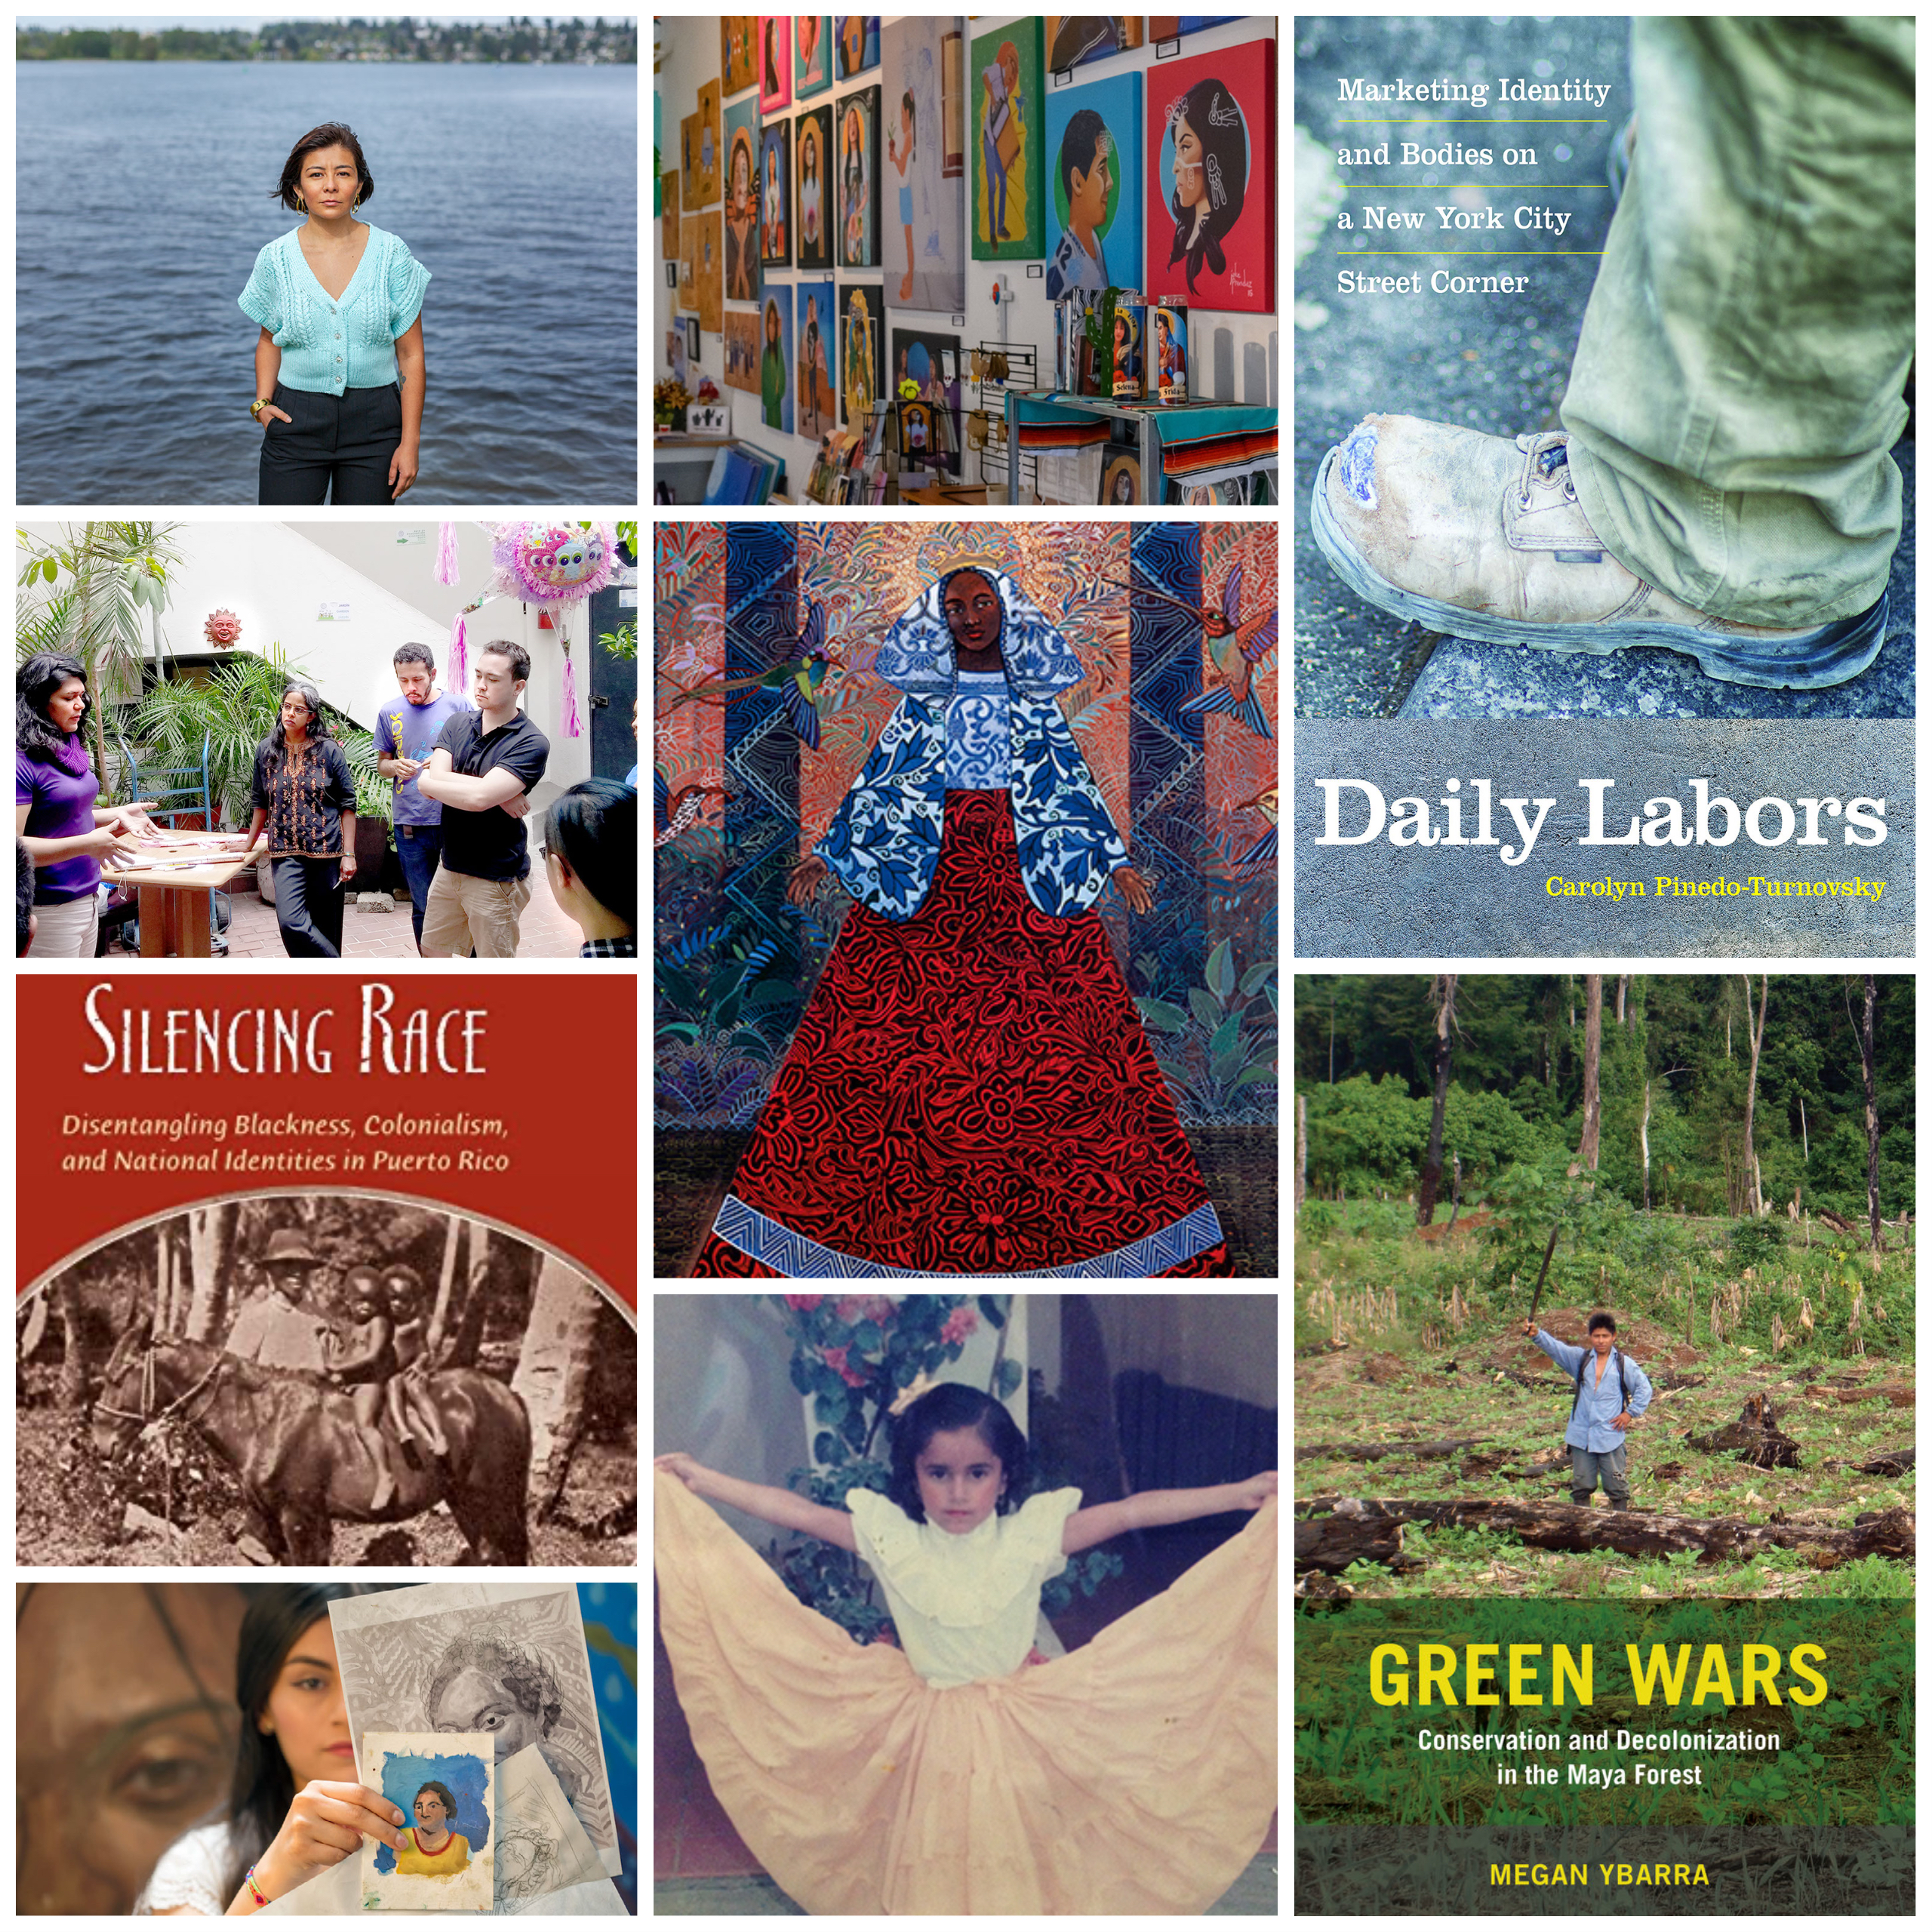 Collage of work by Arts & Sciences faculty, students and alumni related to Hispanic Heritage Month